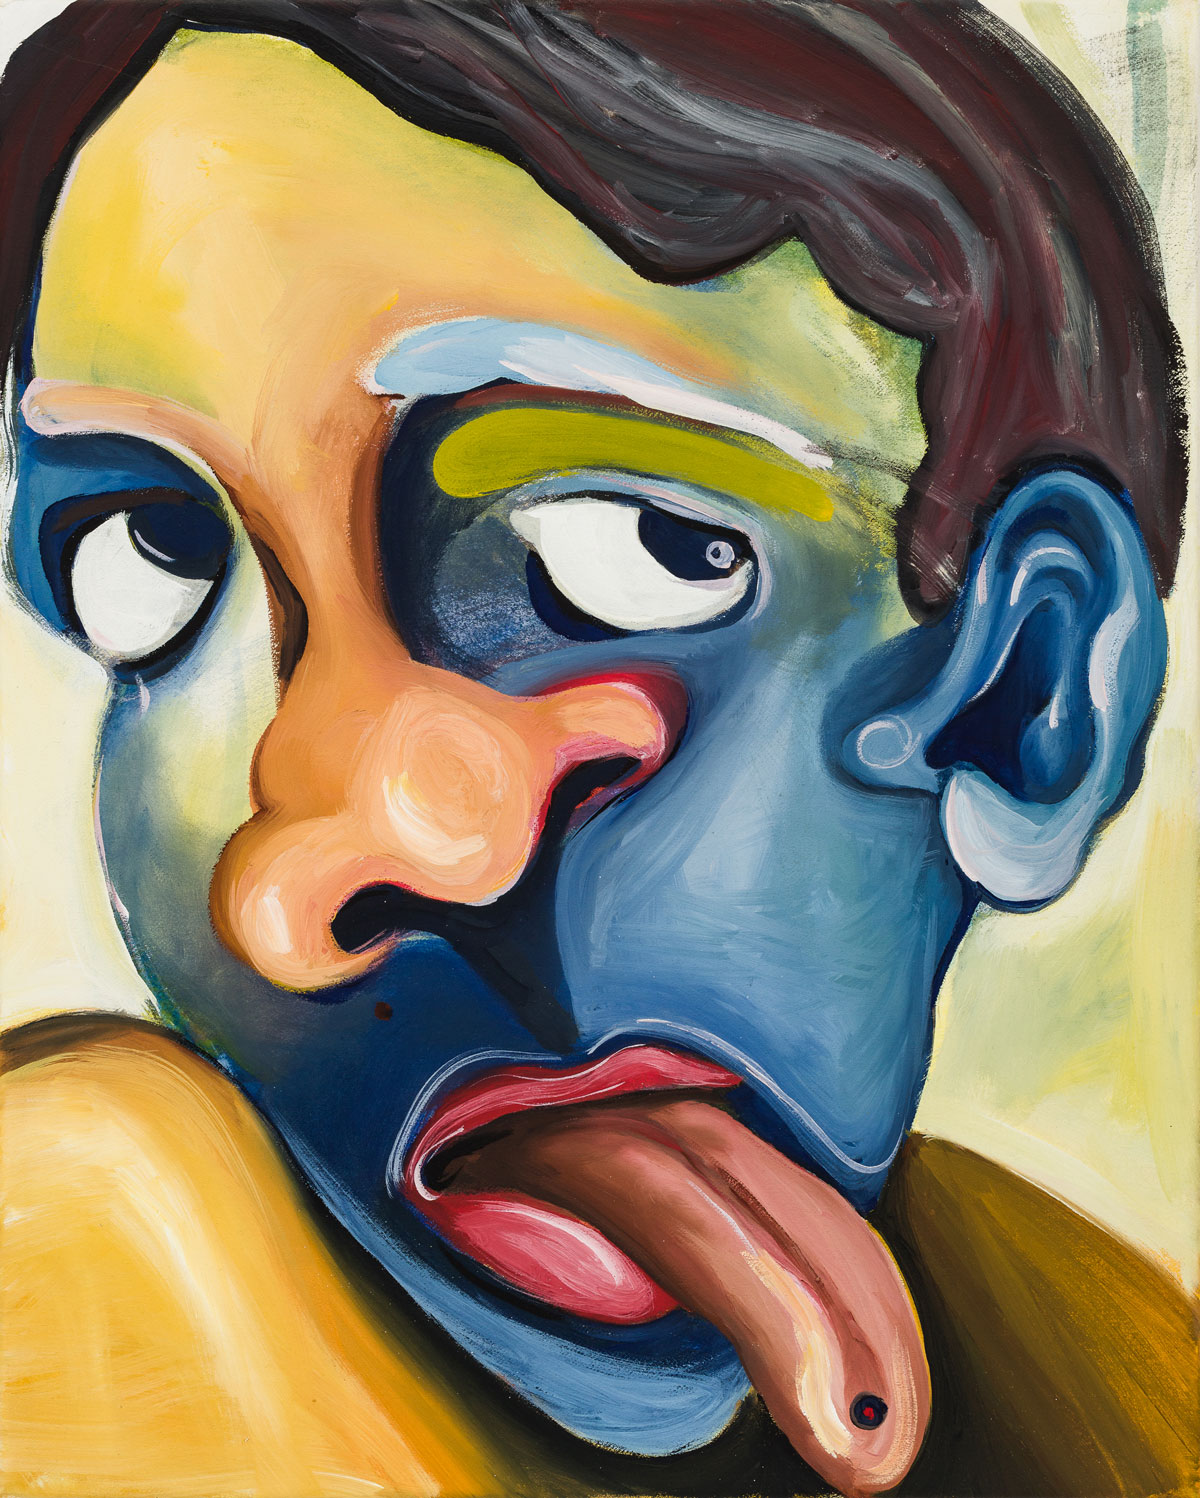 Man's face with tongue hanging out